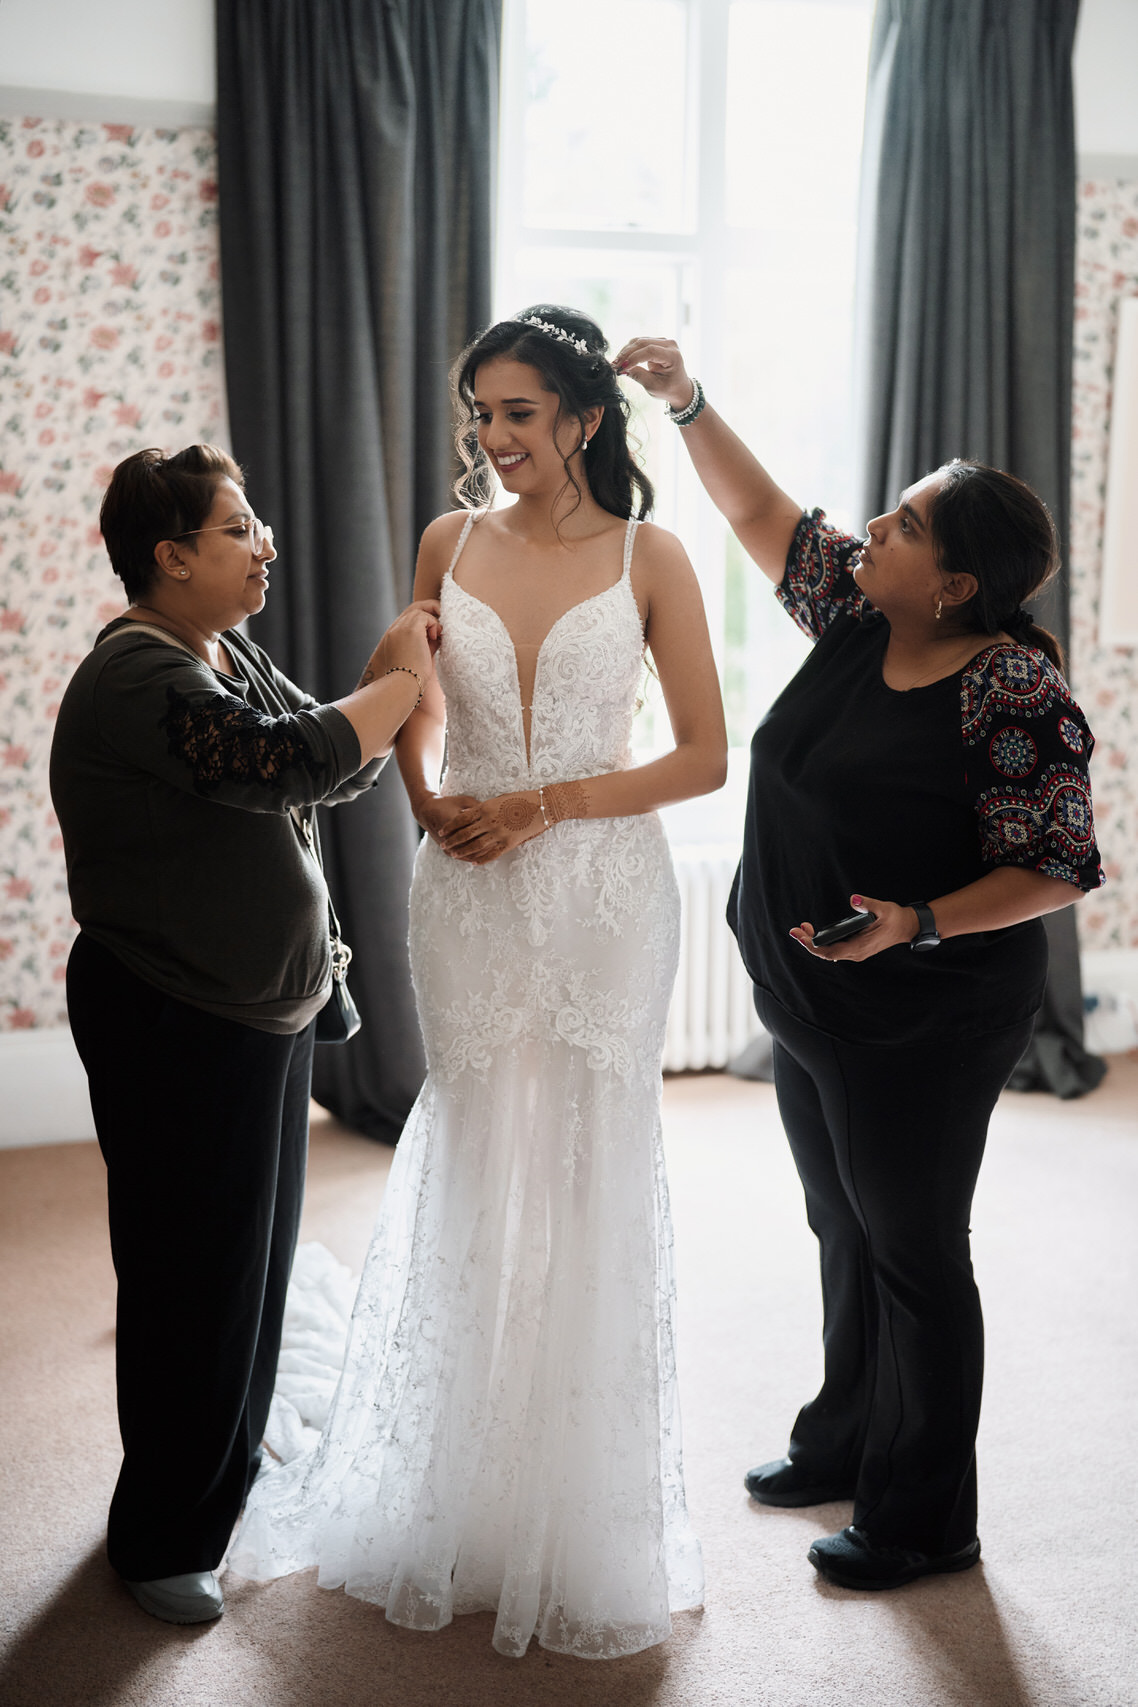 A woman is helping a bride prepare in a room.